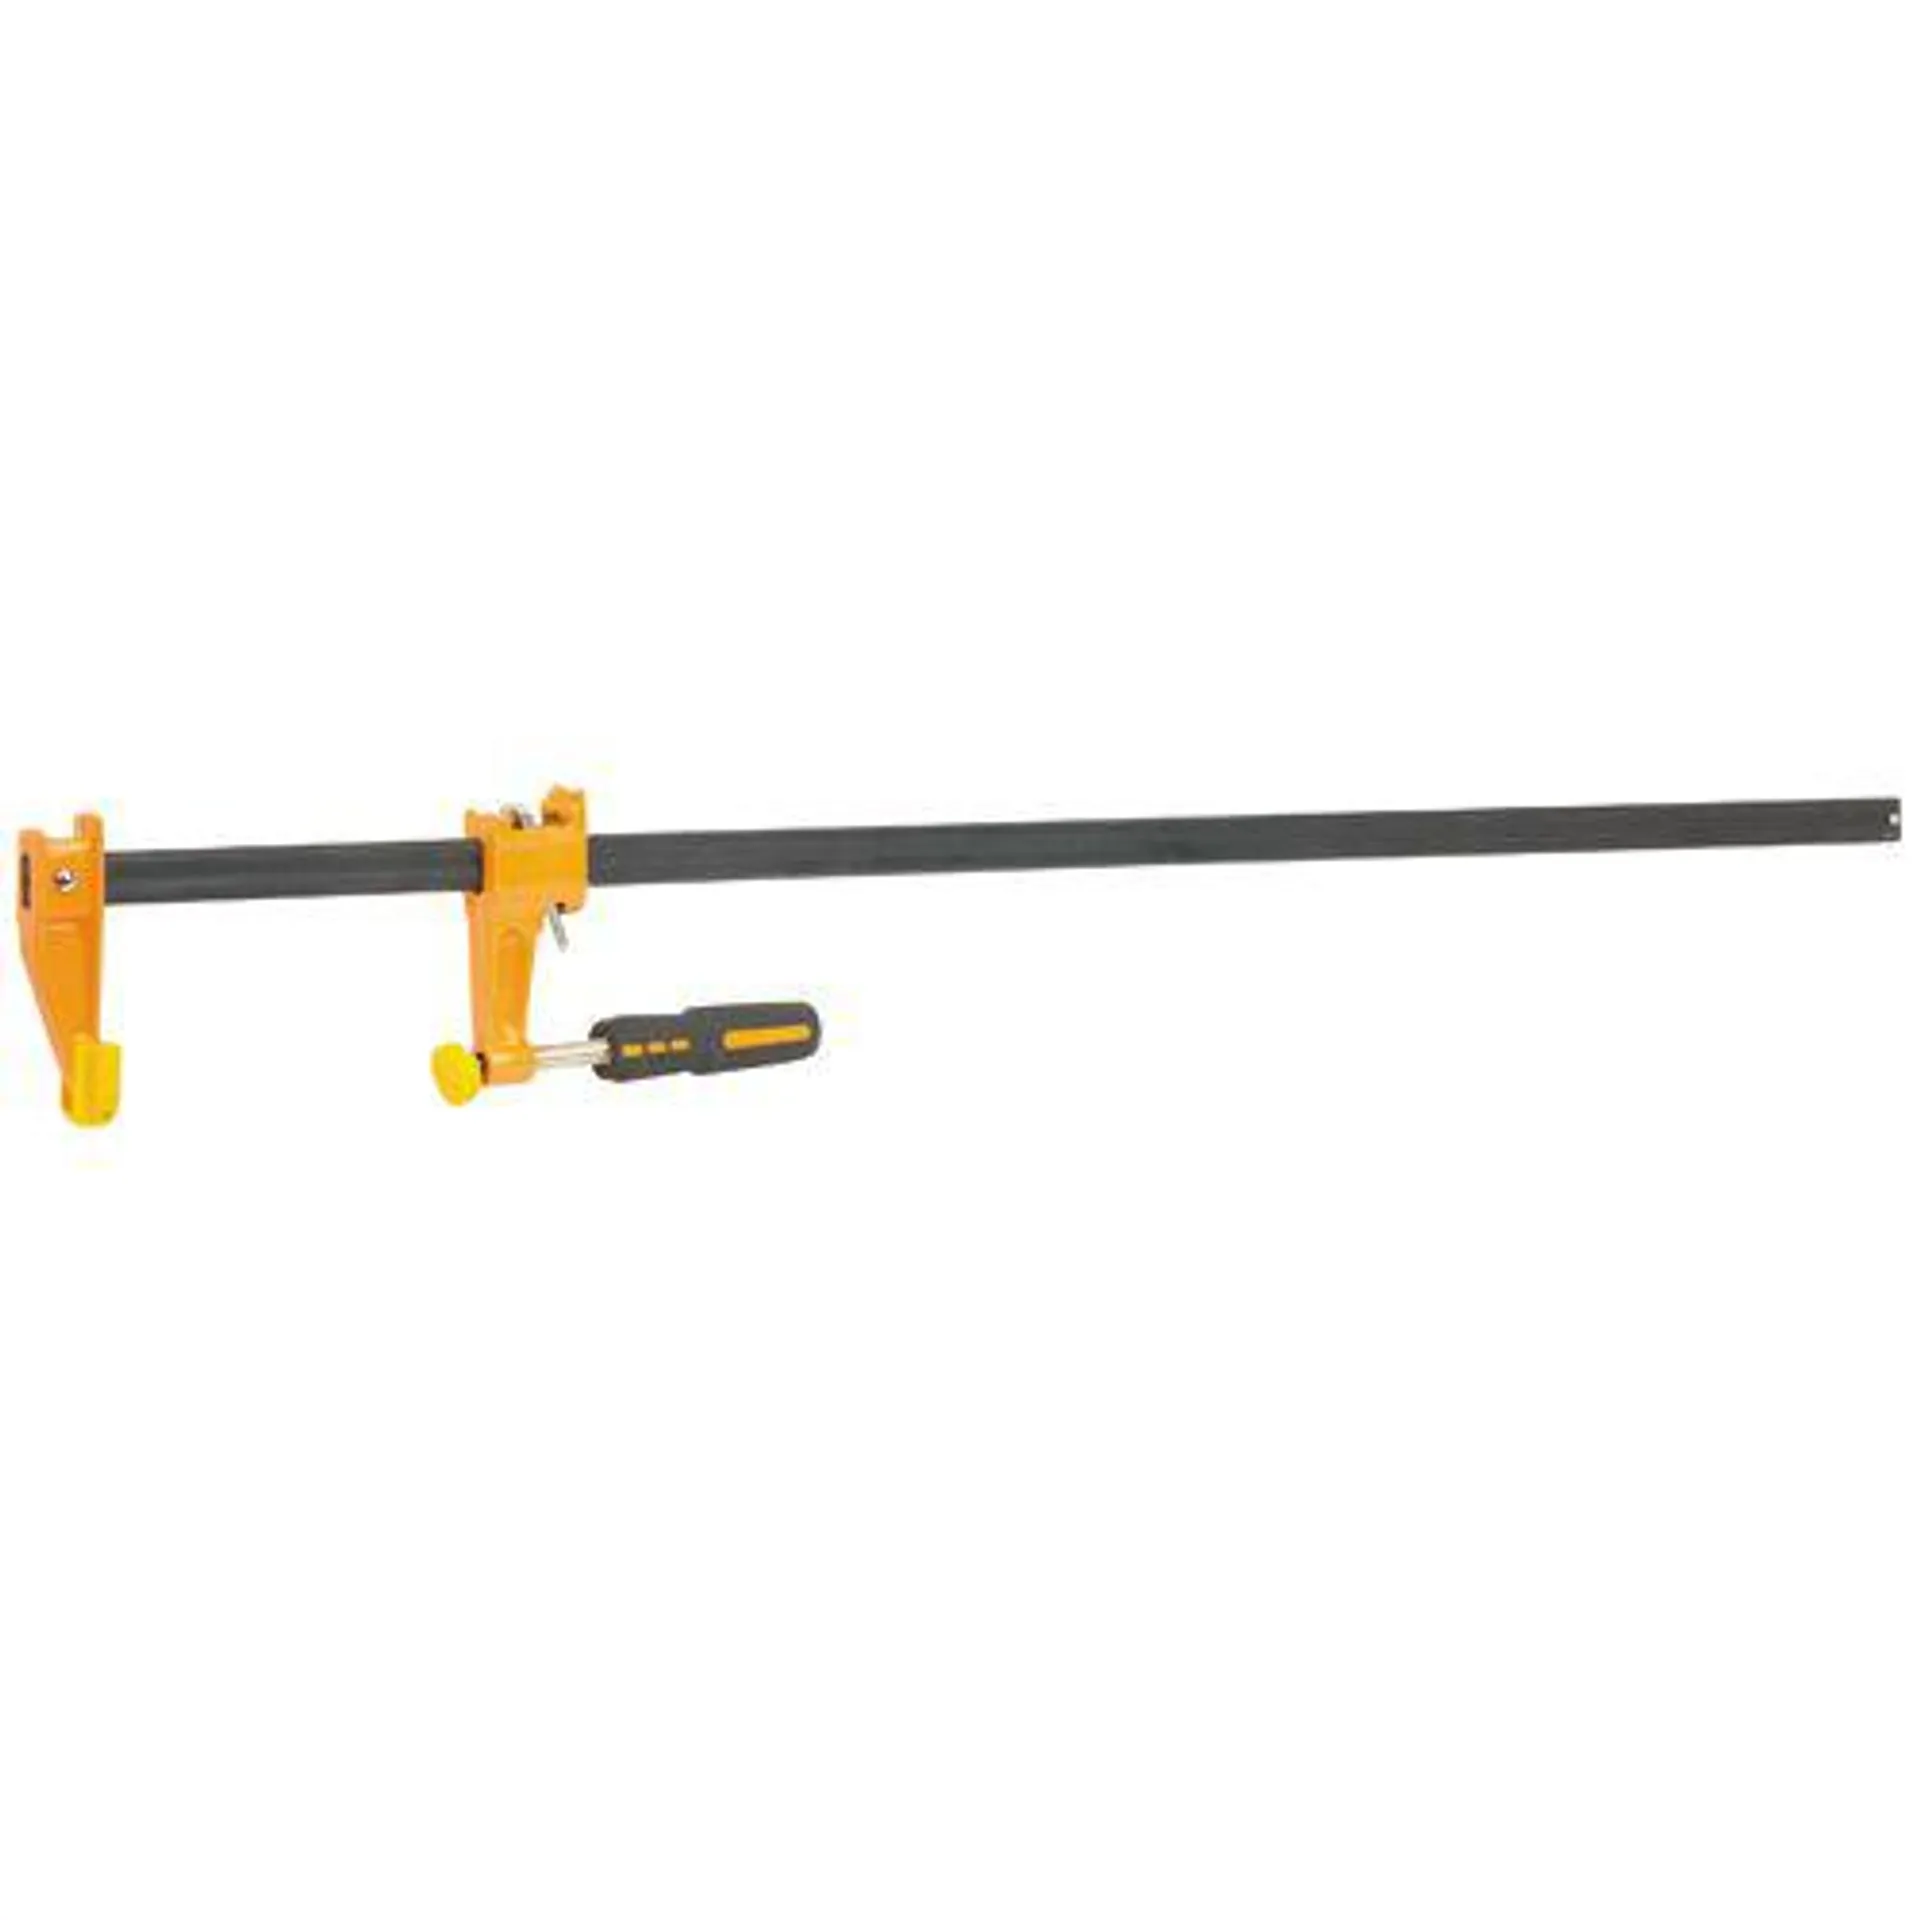 30 in. Quick Release Bar Clamp